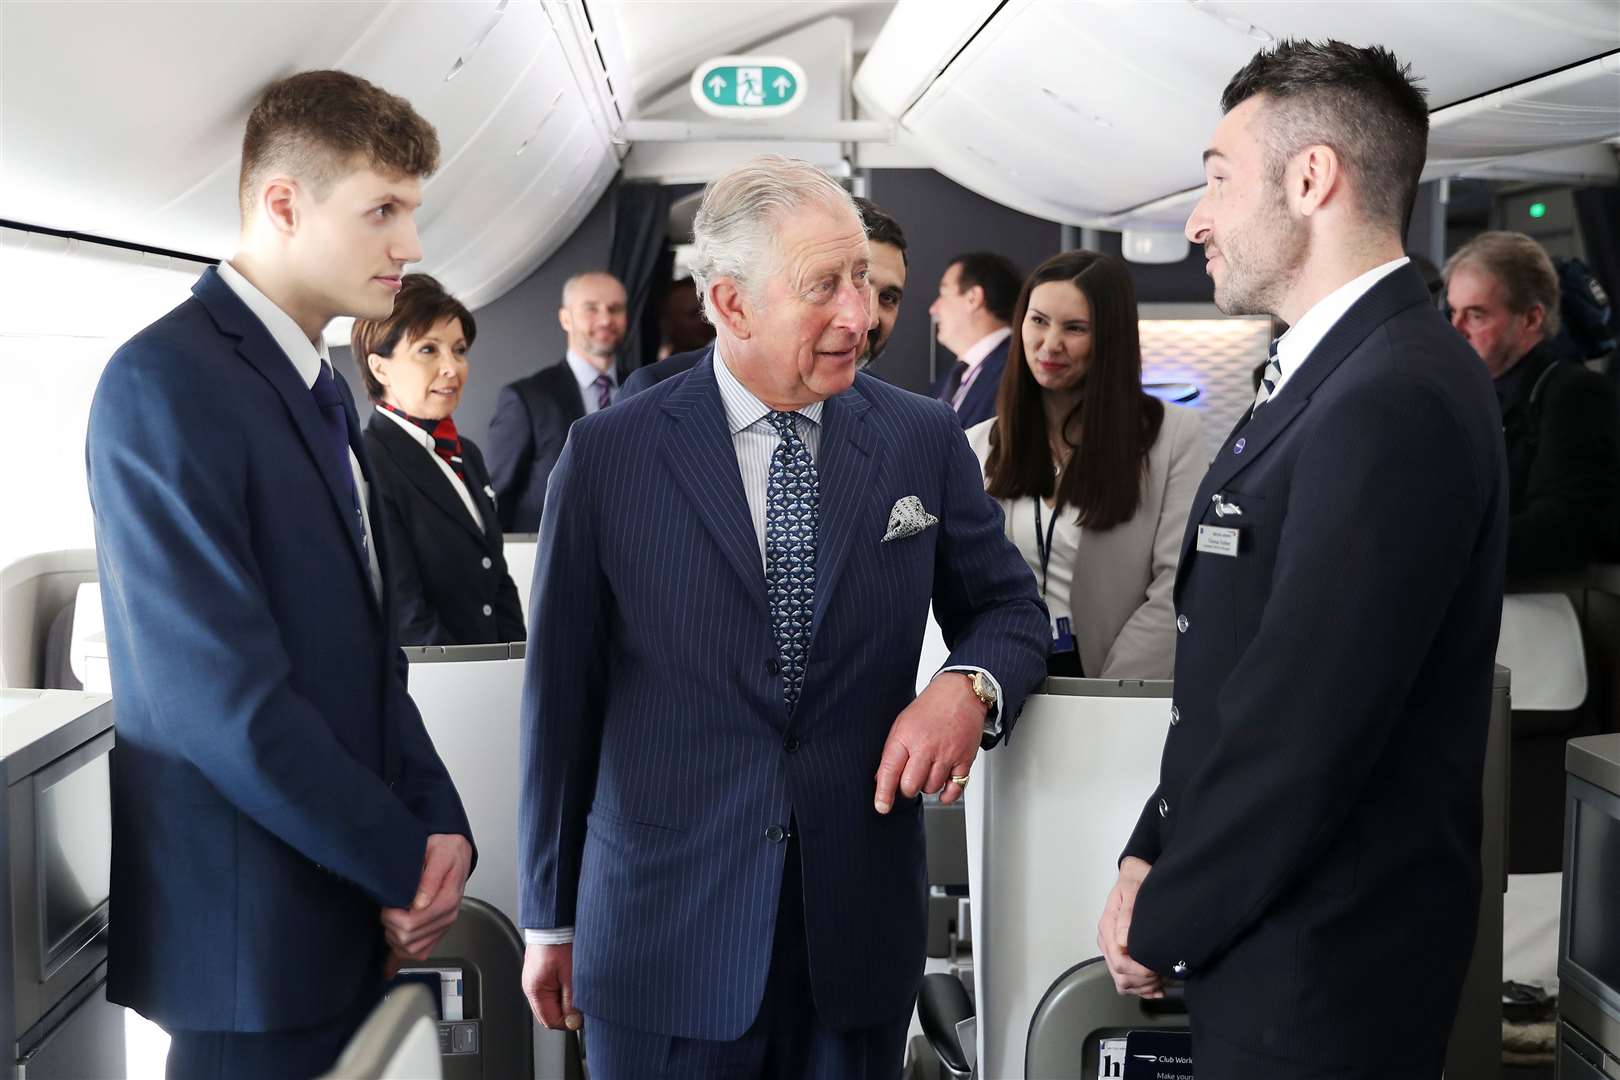 Charles visited Heathrow Airport in March 2018 (Chris Jackson/PA)